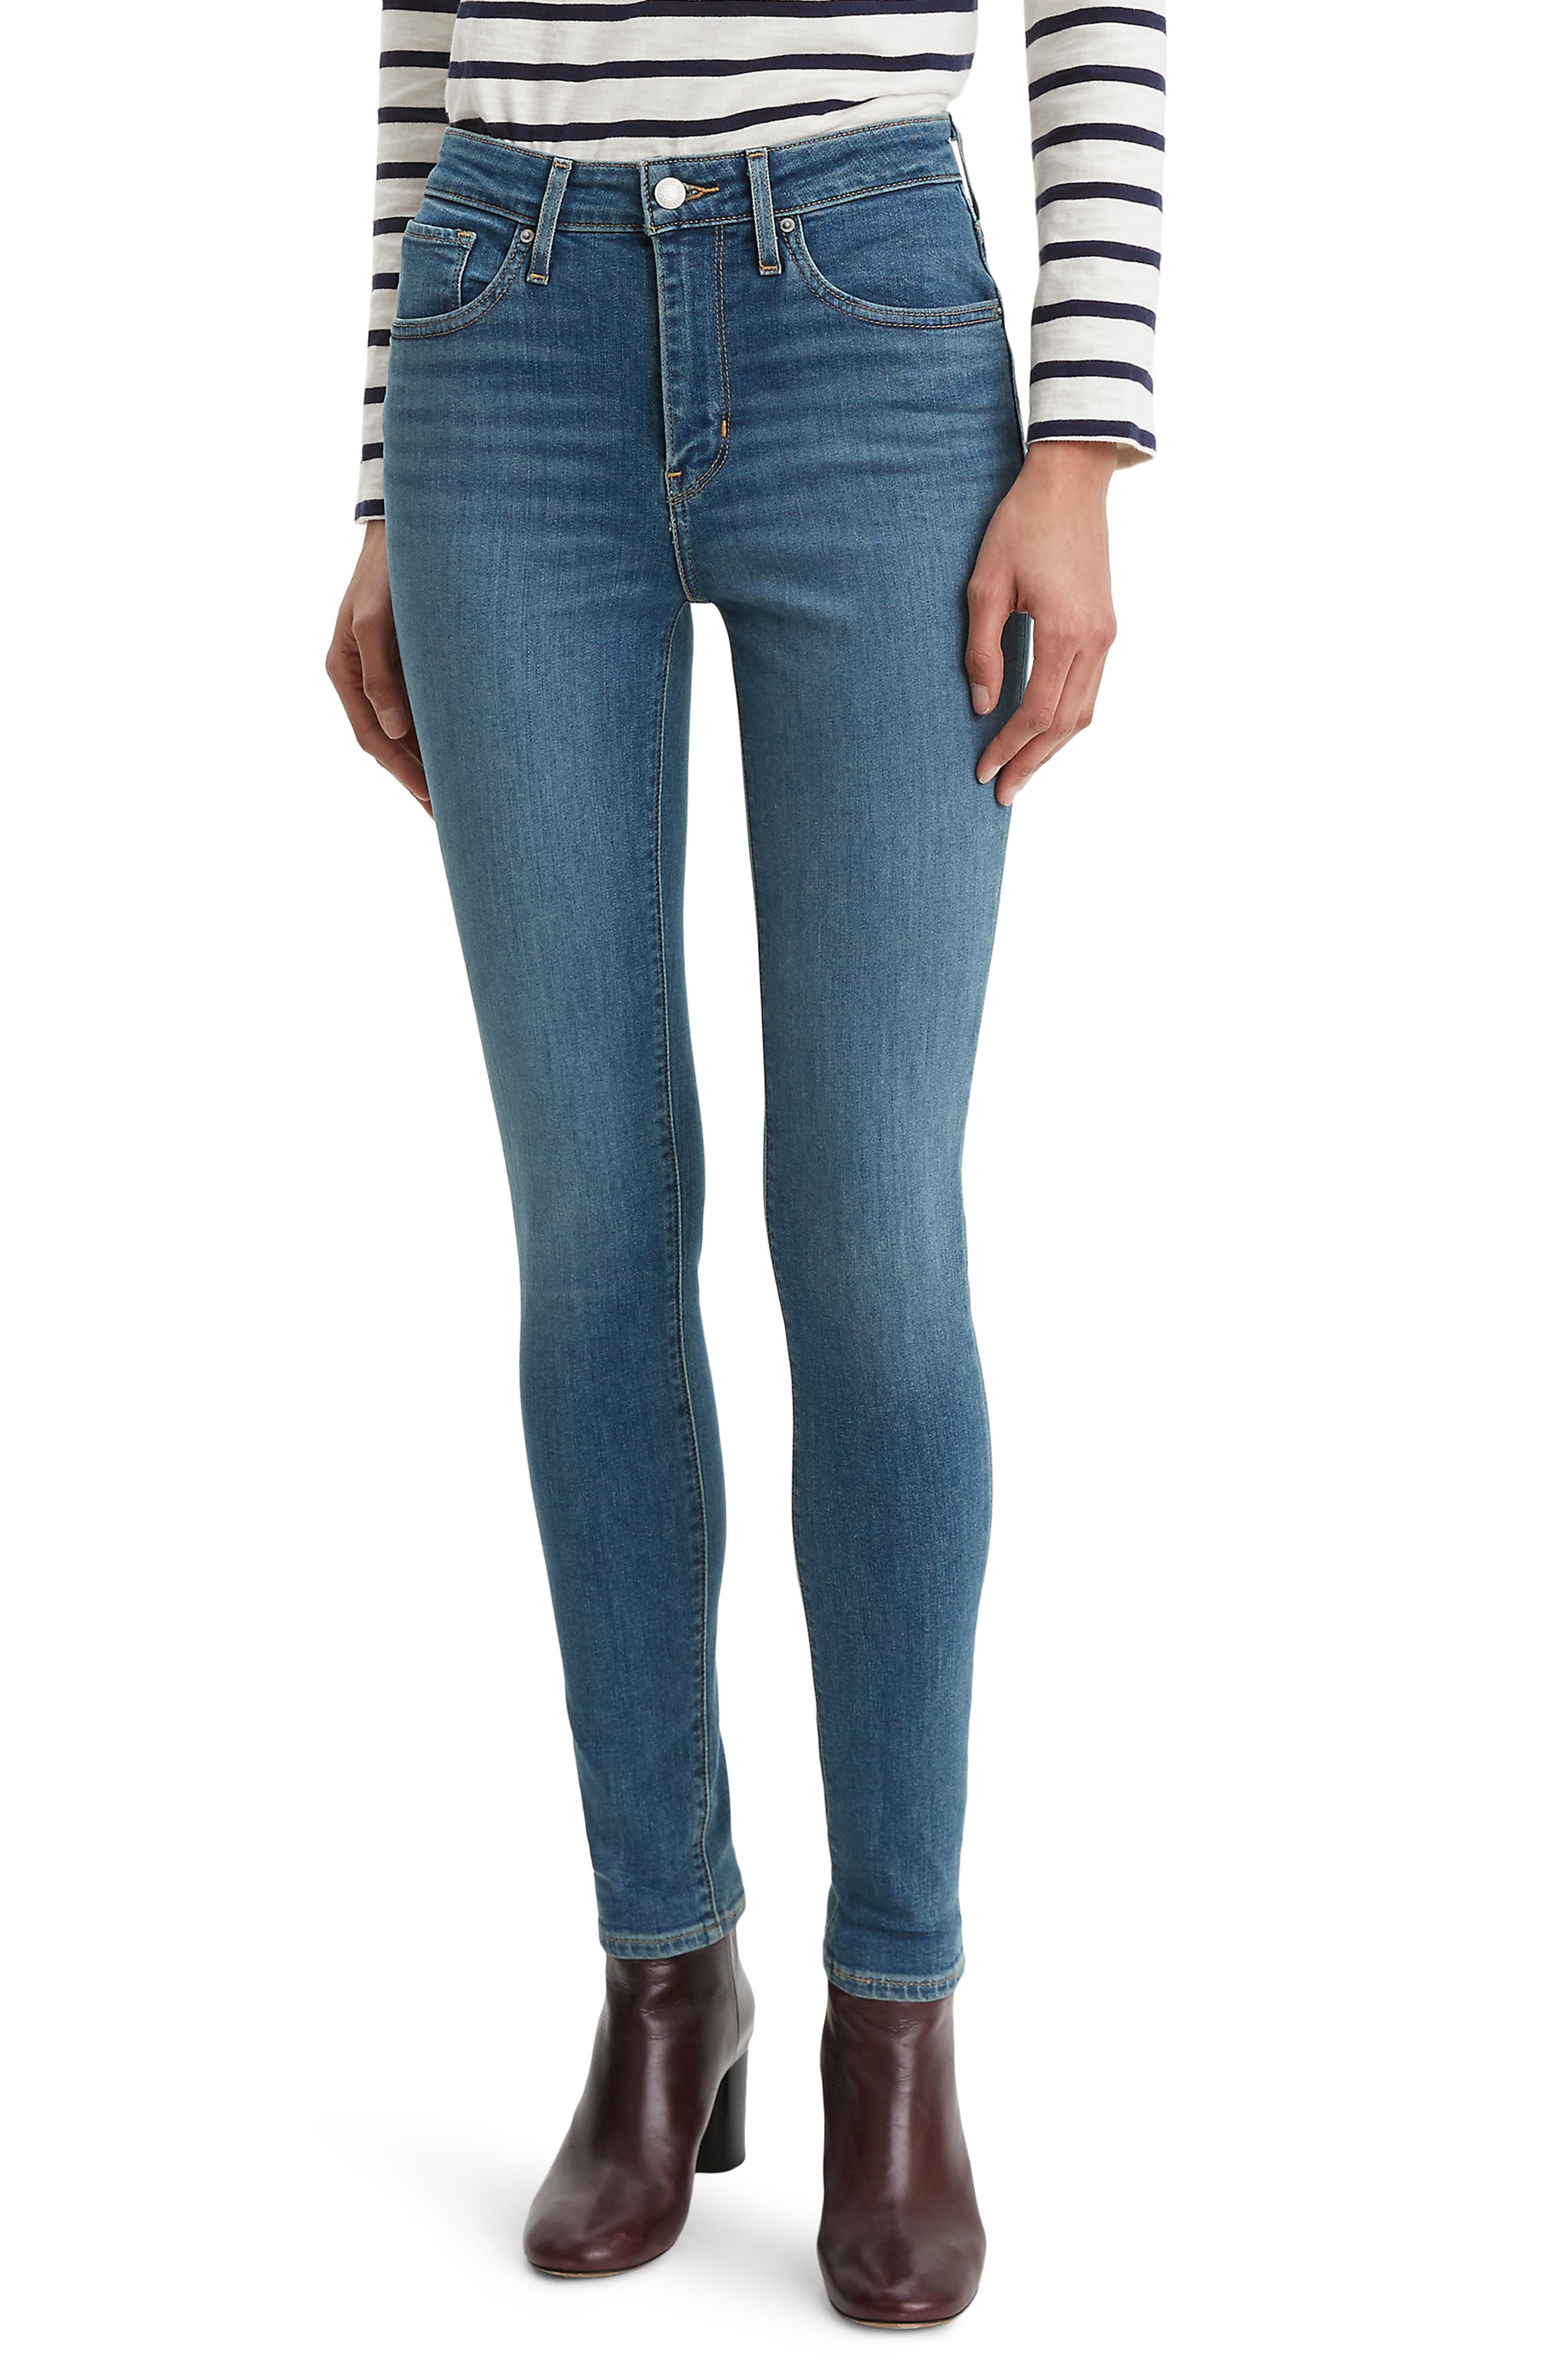 levi's 721 high rise ankle skinny jeans